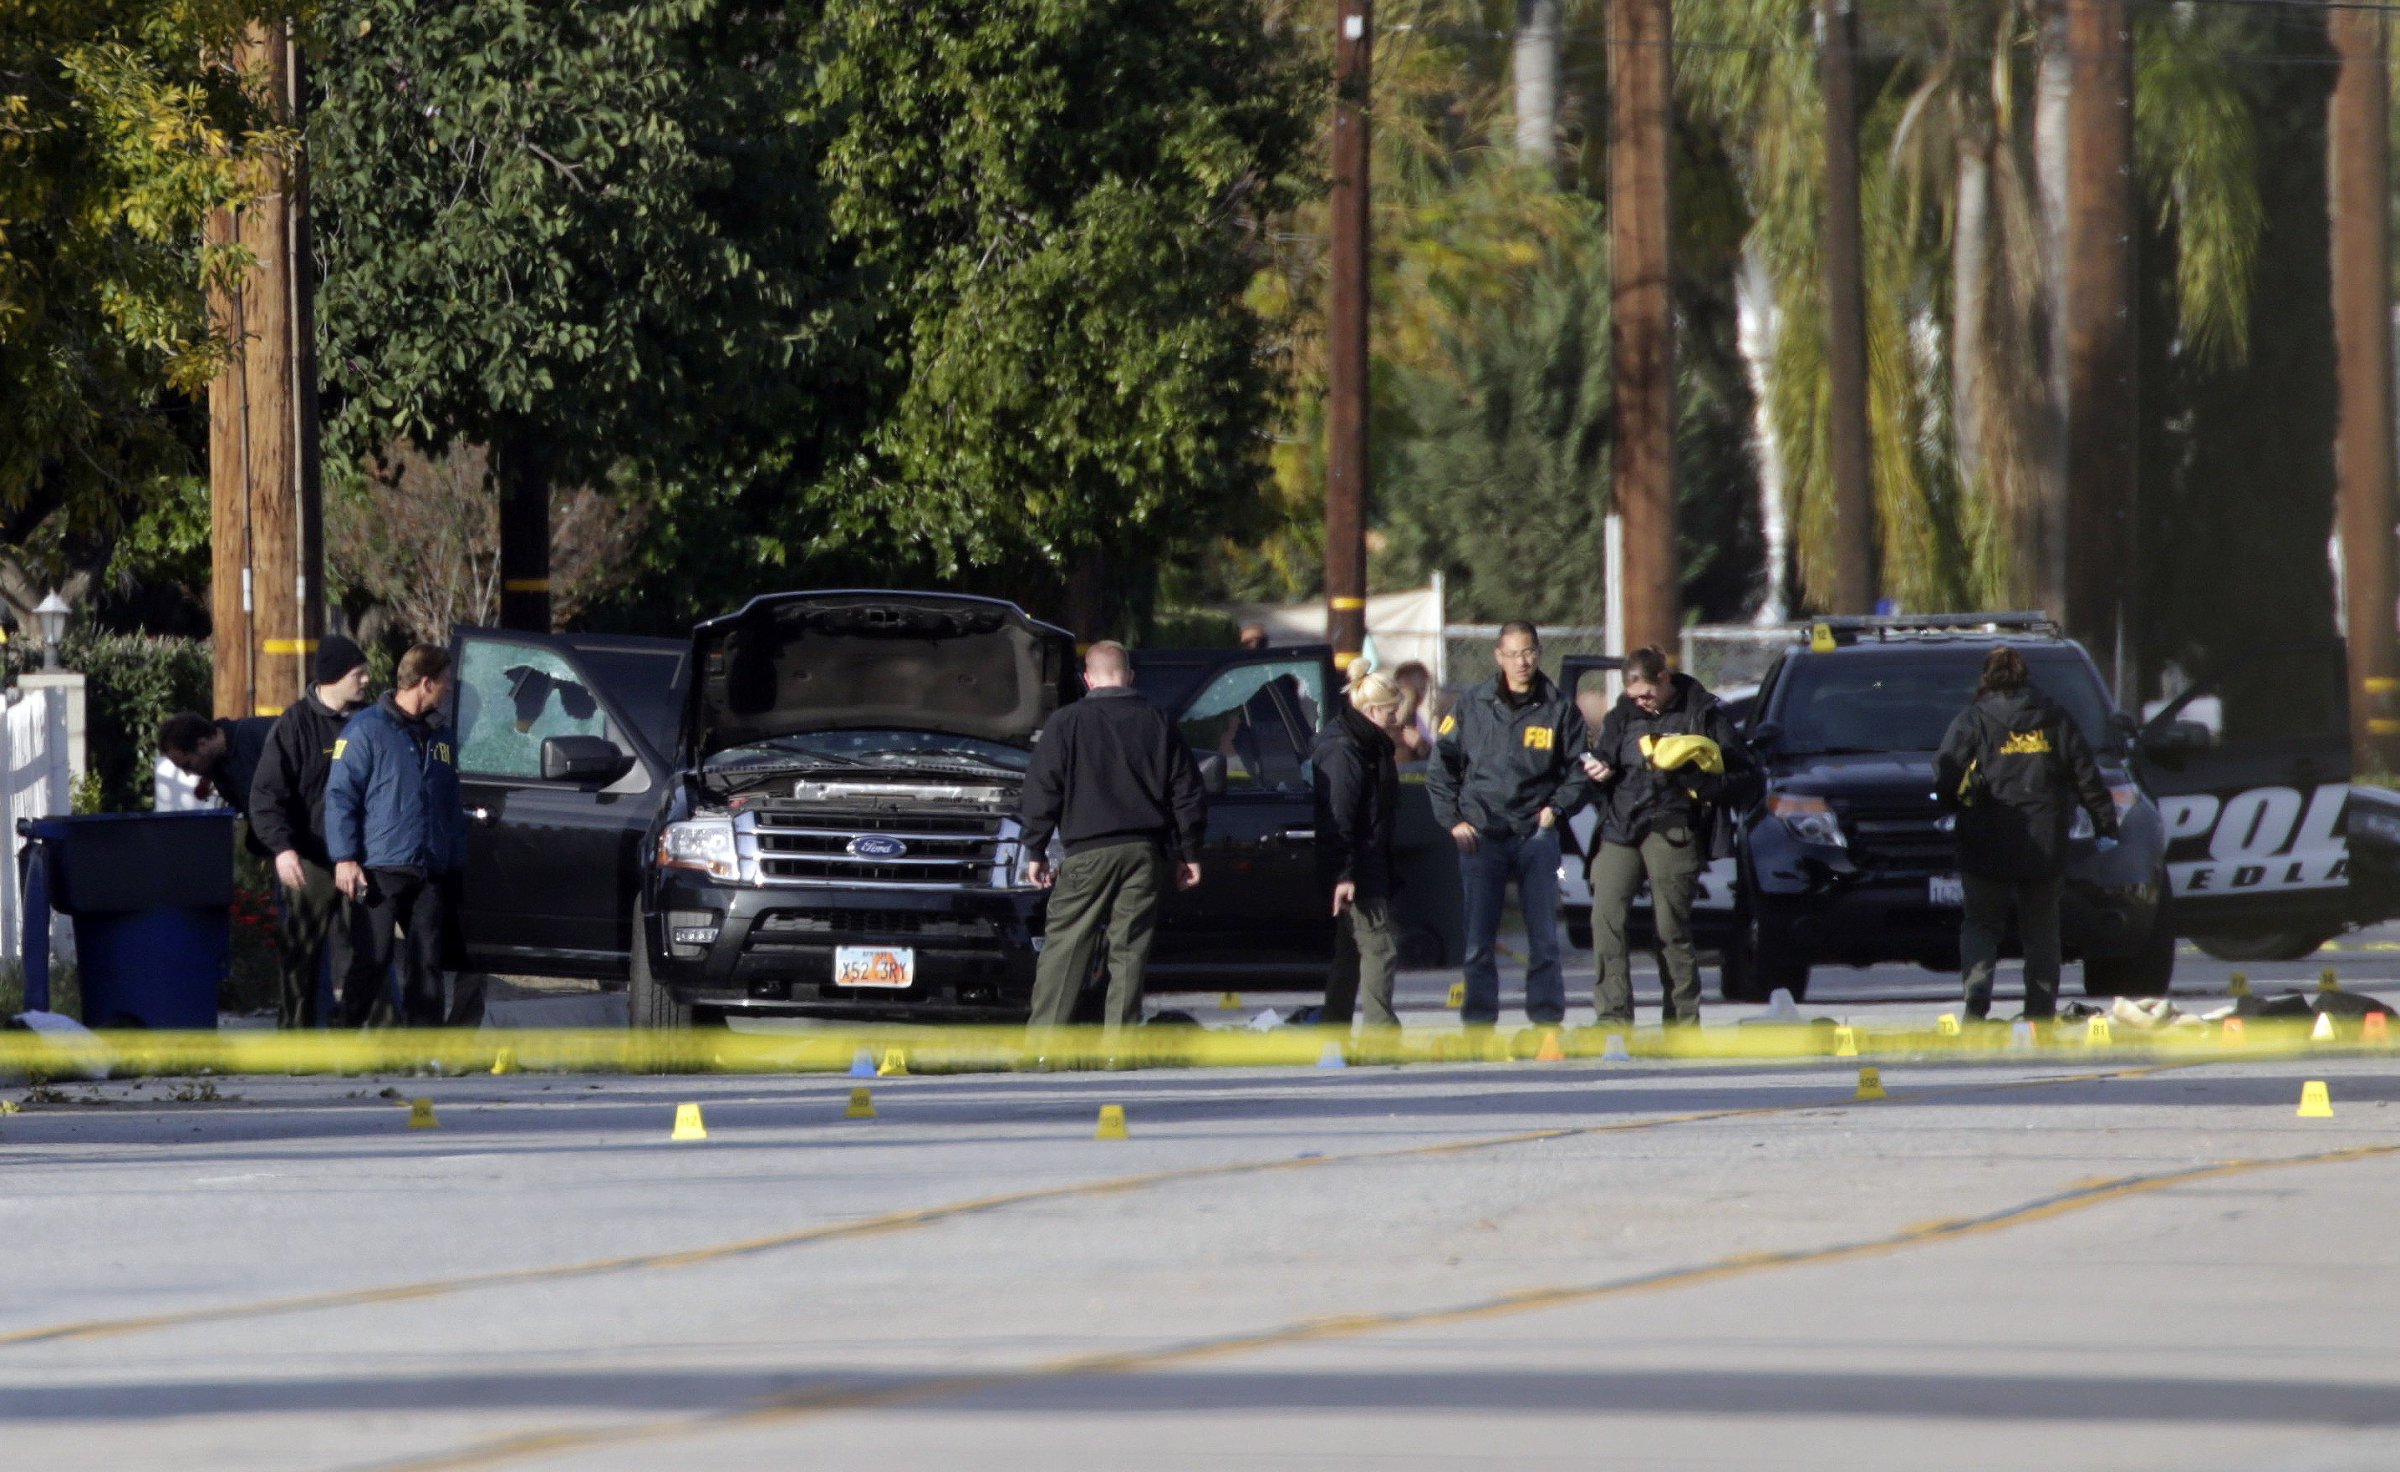 Law enforcement personnel continue to investigate on San Bernardino Avenue, where two suspects in the mass shooting at the Inland Regional Center died in a shootout with police in San Bernardino, Calif. on Dec. 3, 2015.